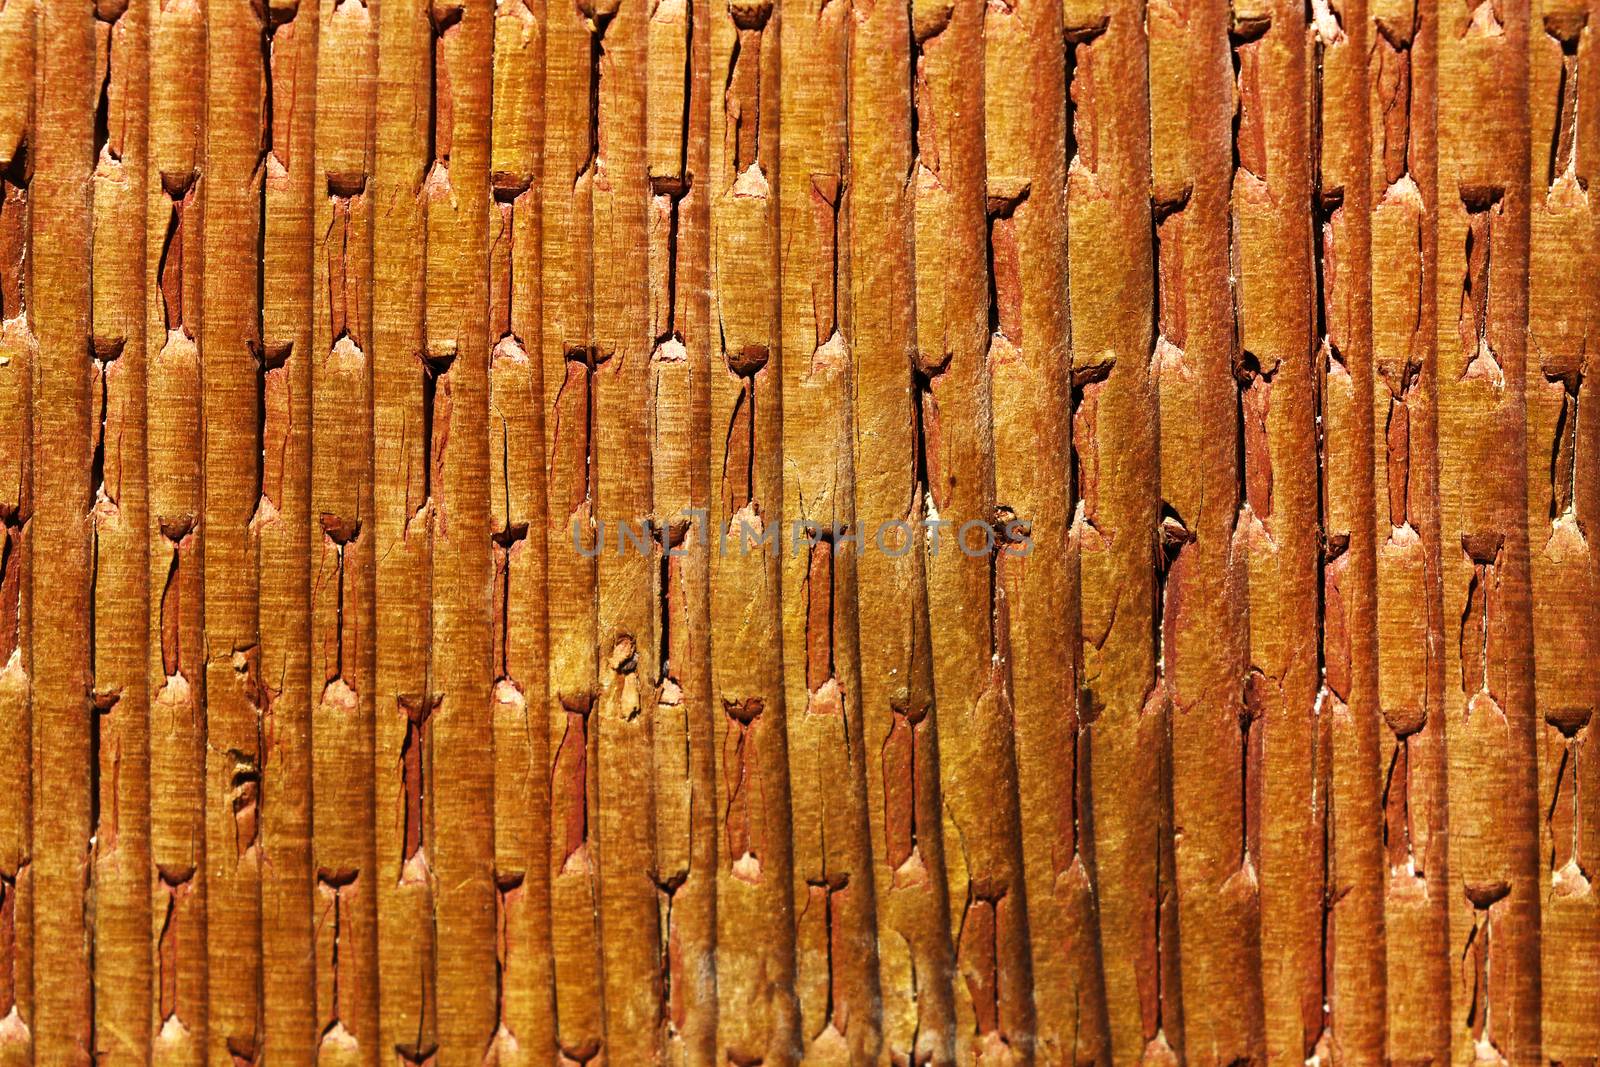 Wood texture. Surface of teak wood background for design and decoration.